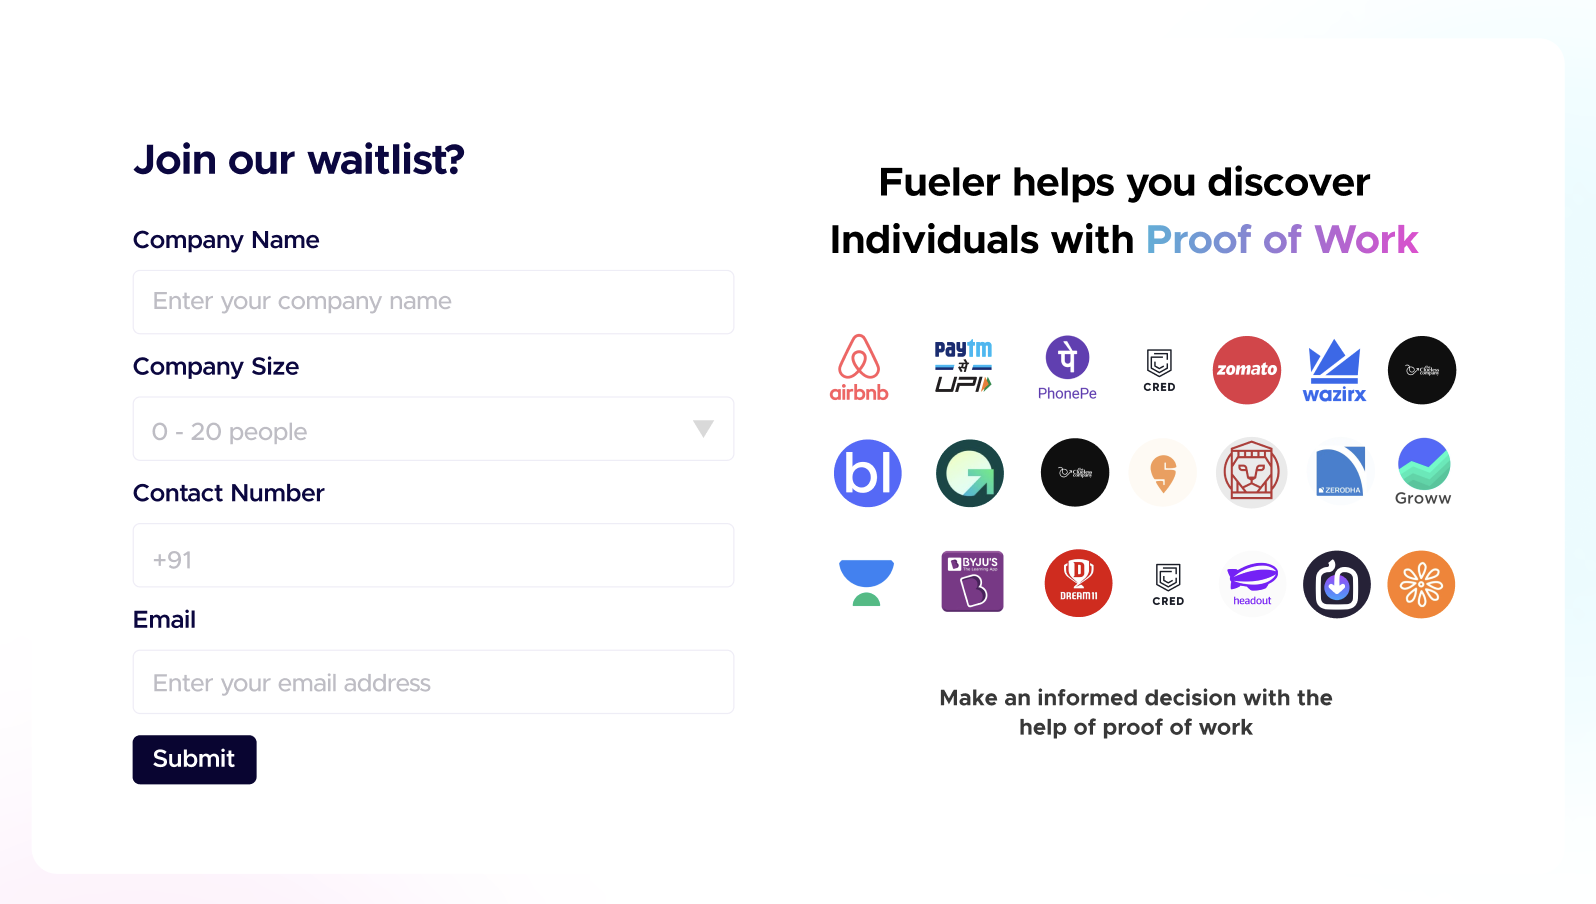 Fueler helps you discover Individuals with Proof of Work